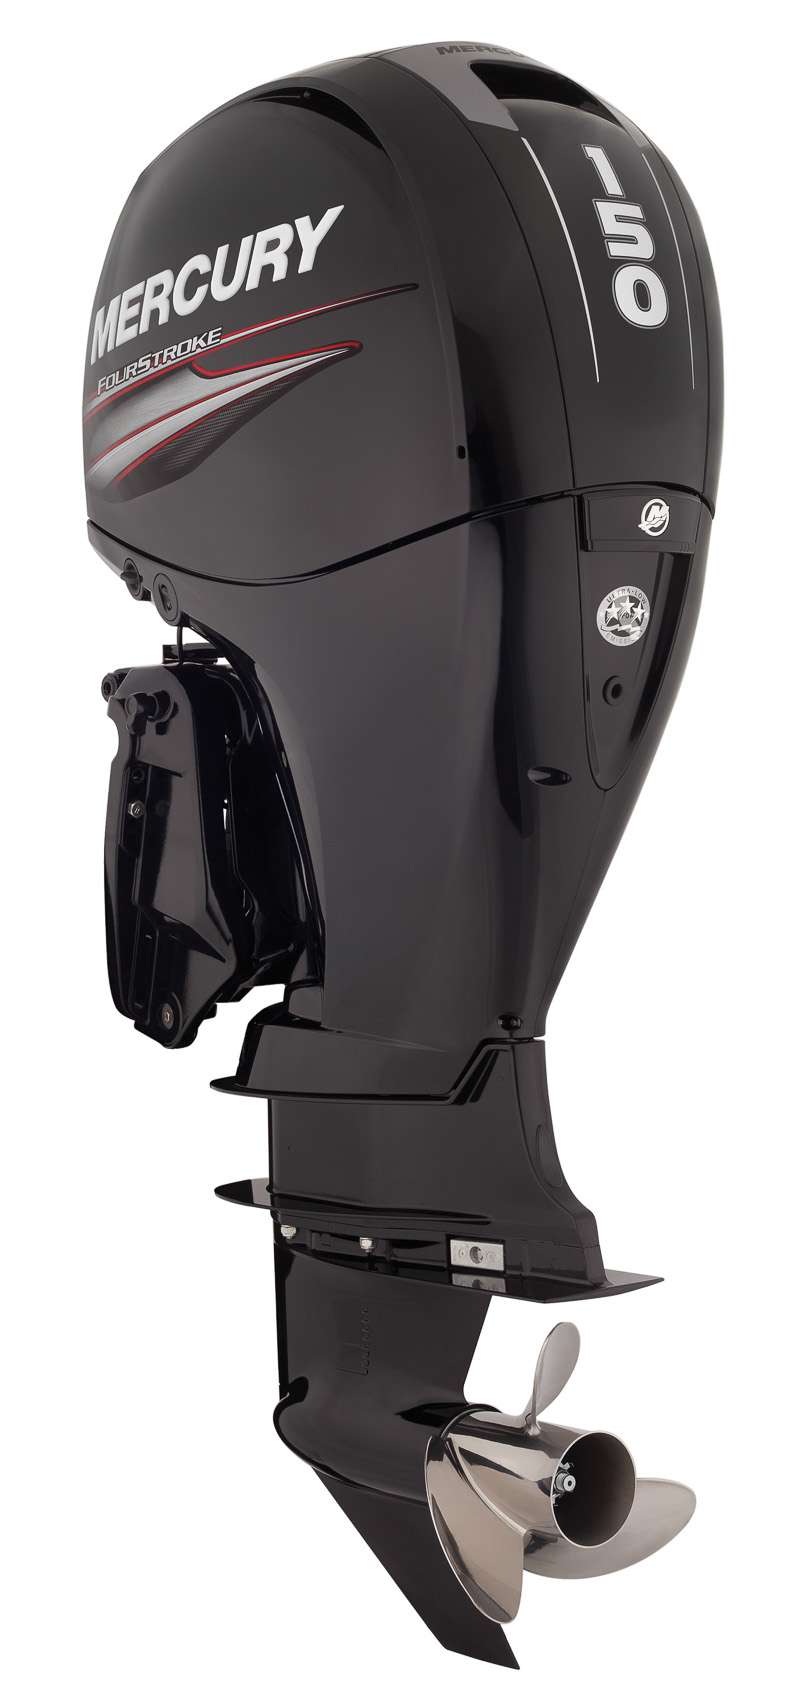 Mercury
Small HP 4 strokes
Brand new for the Wisconsin outboard manufacturer is a small-horsepower line of 75-, 90-, and 115-horse 4-strokes. They are a shade heavier than 2-strokes but have four cylinders and greater displacement for a super stout midrange and hole shot. 